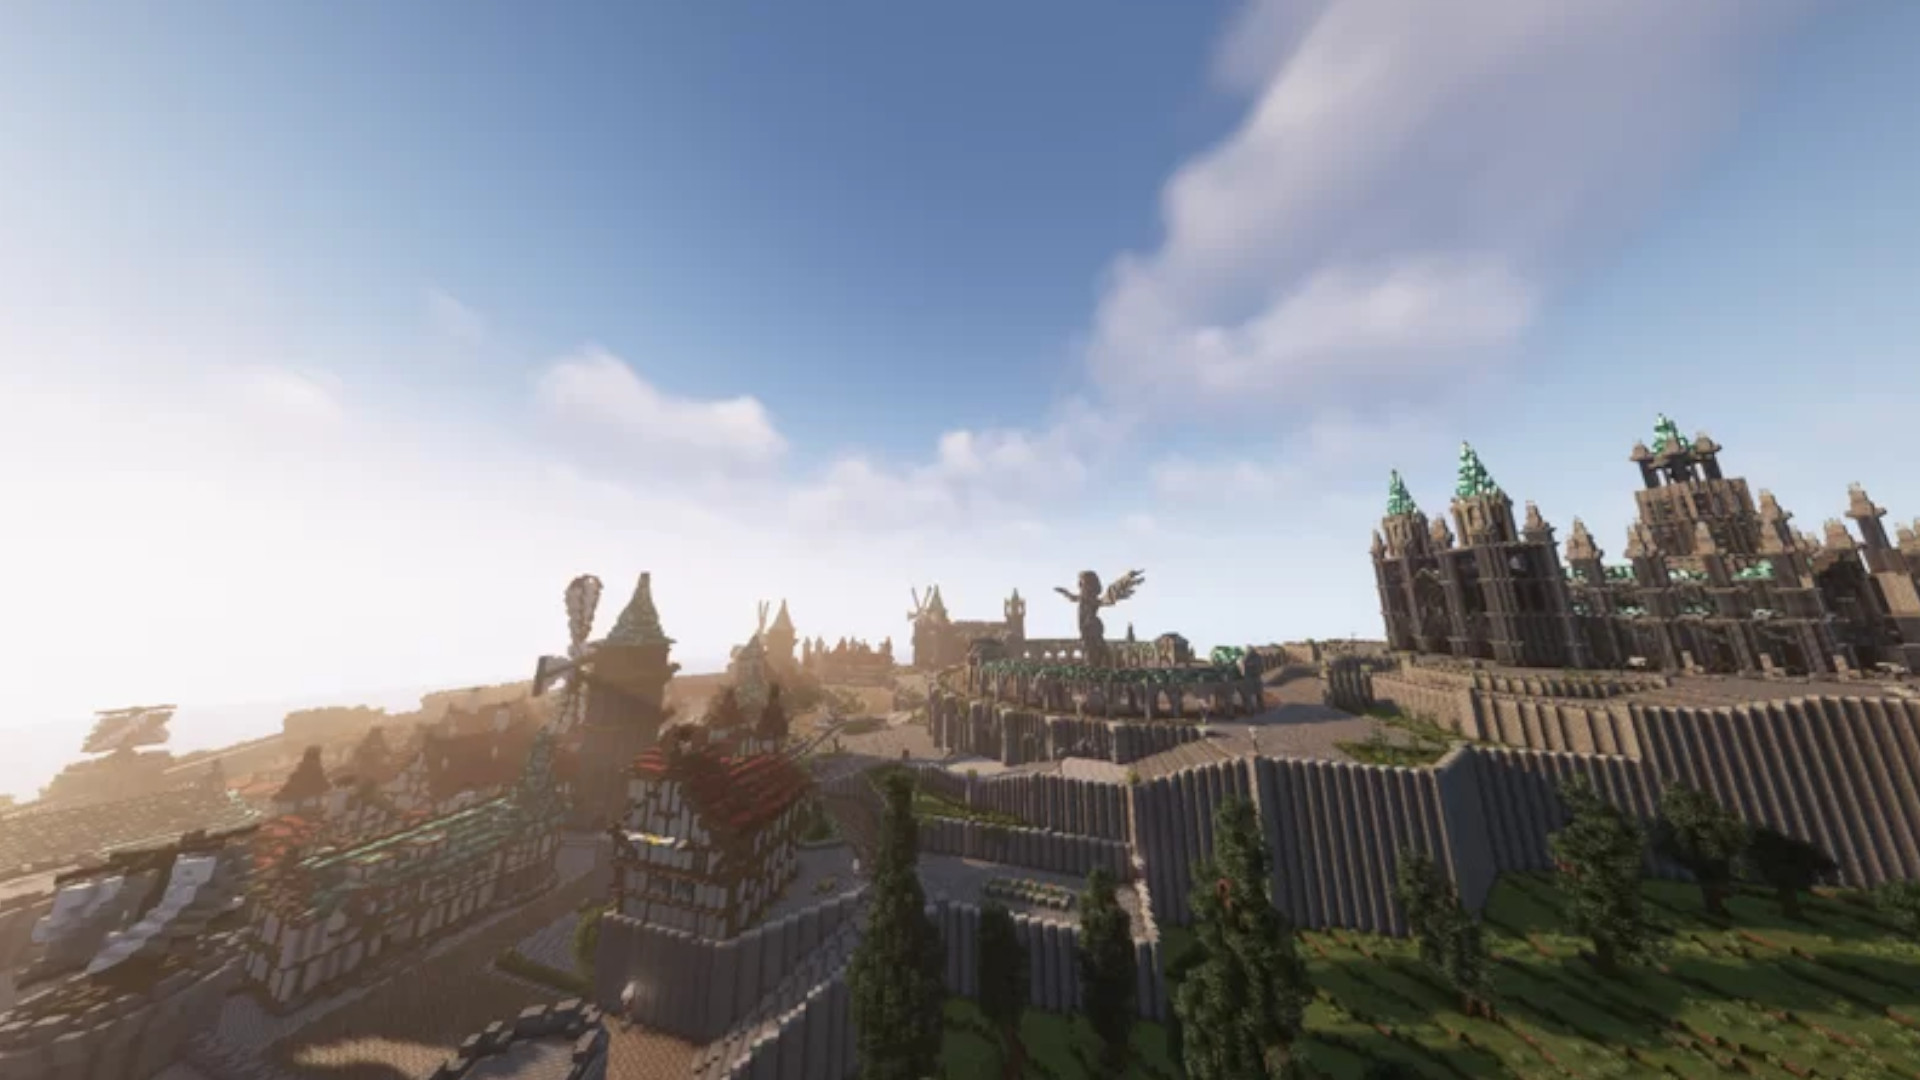 Minecraft players spend 400 hours building Genshin Impact’s Mondstadt at 1:1 scale